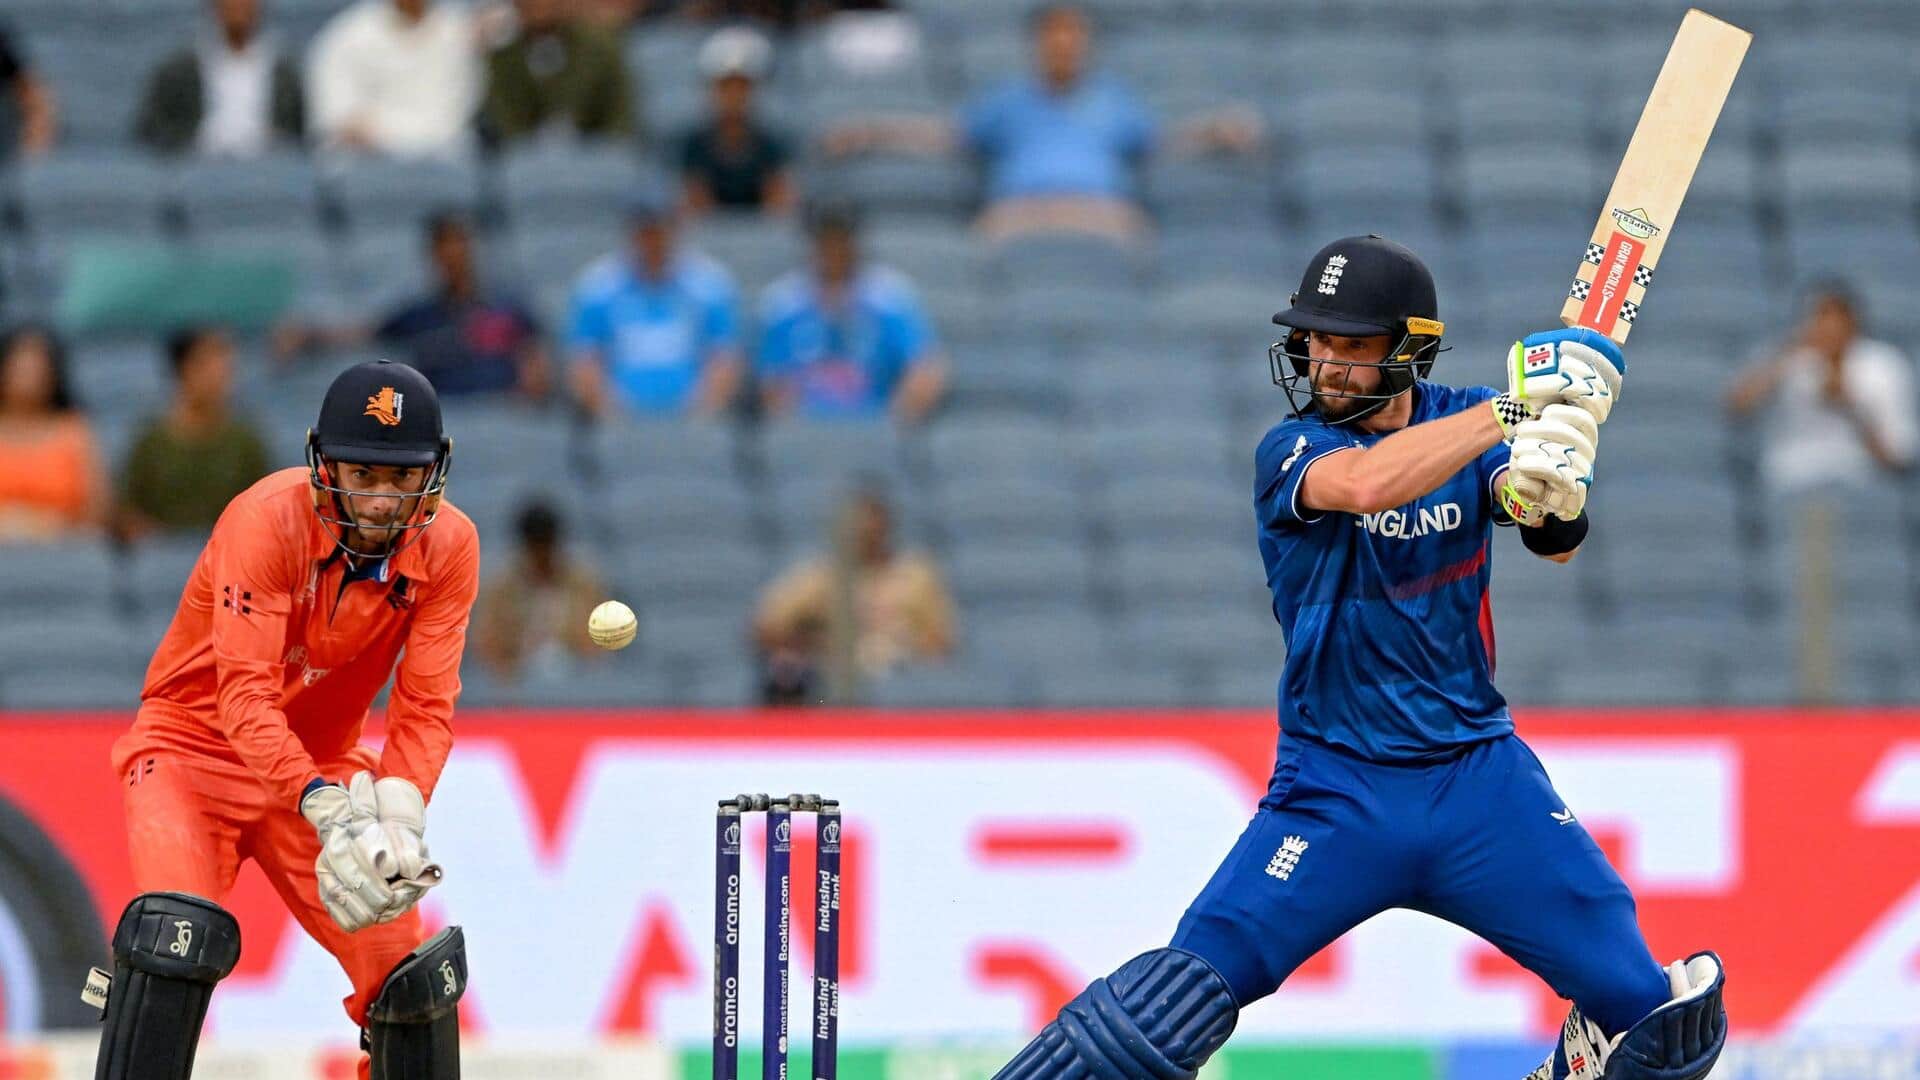 England's Chris Woakes slams his maiden World Cup fifty: Stats